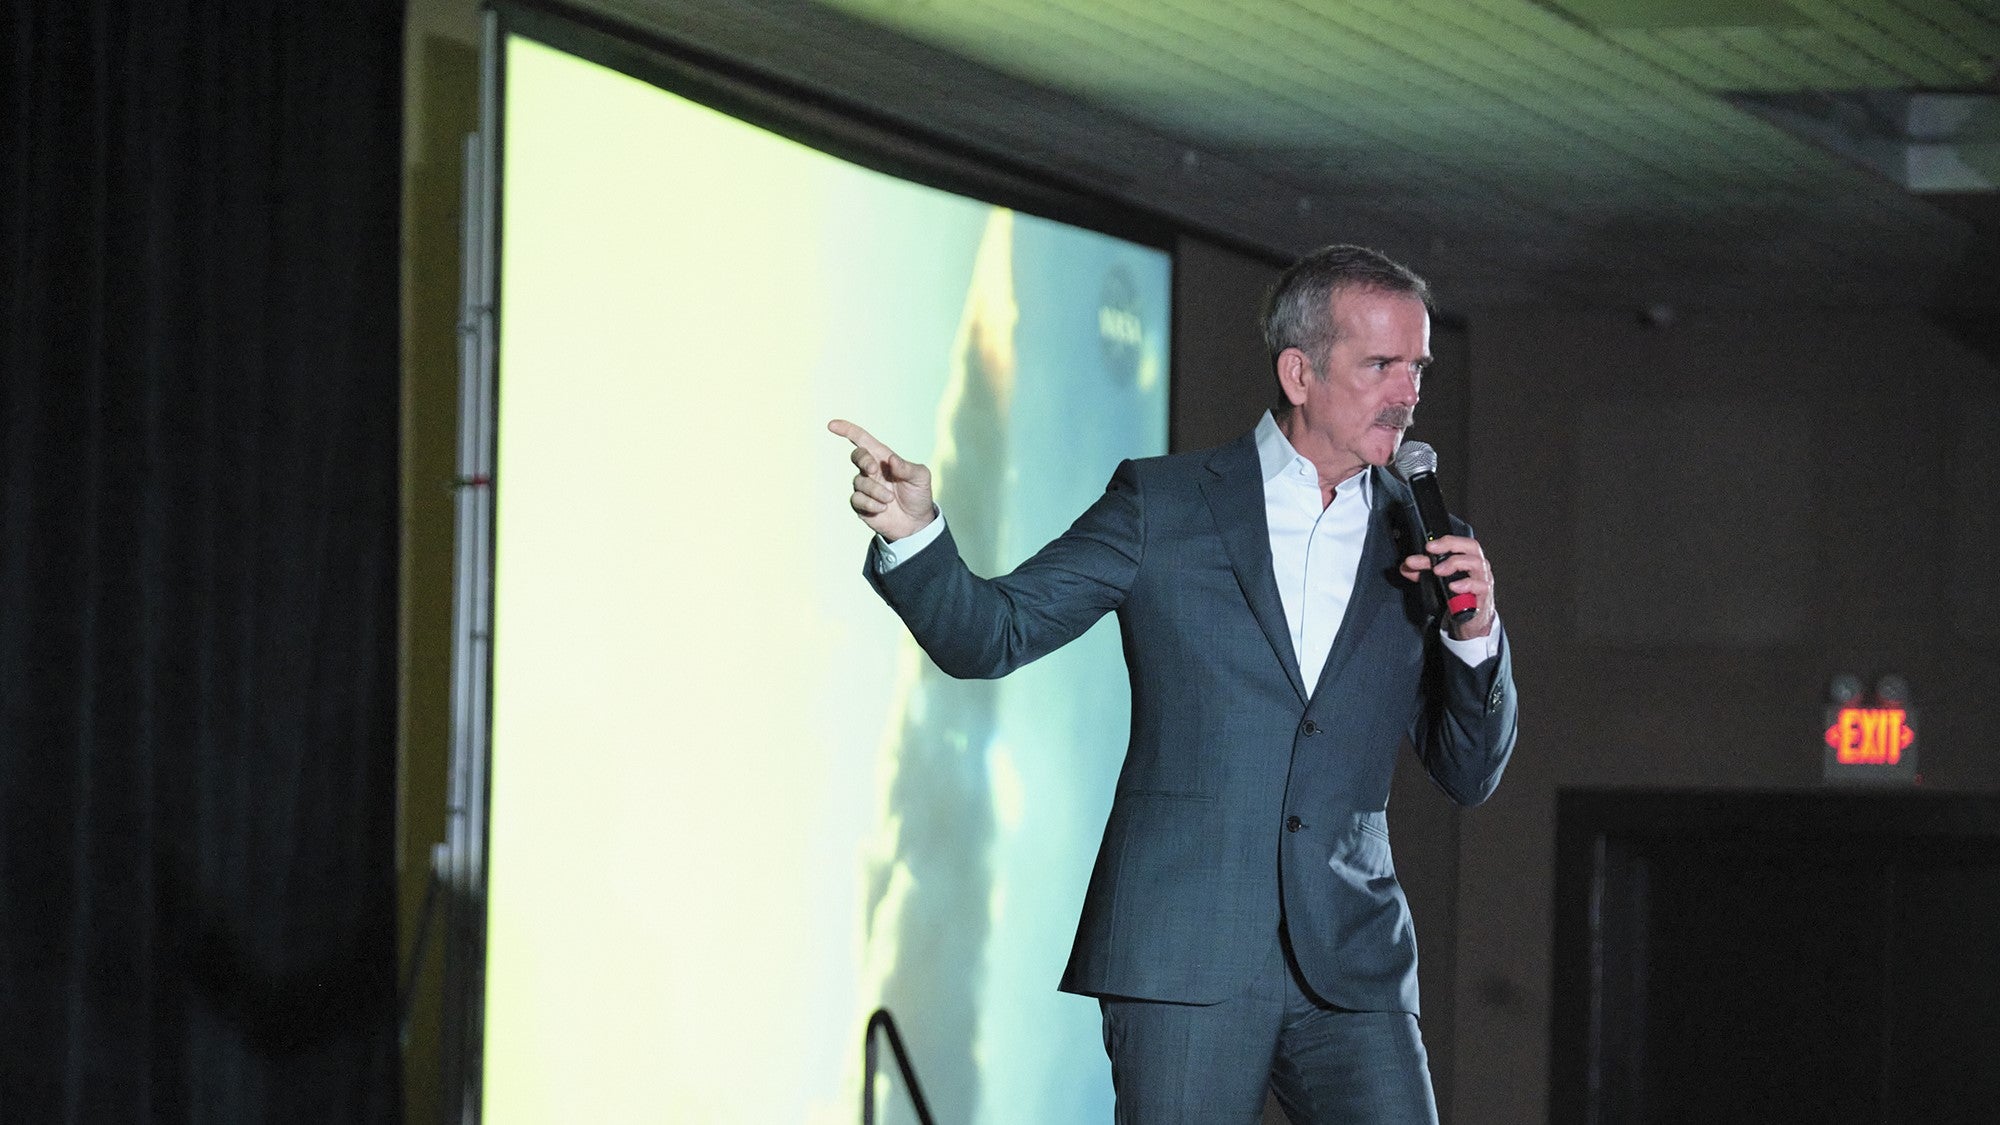 Commander Chris Hadfield pointing at a screen on stage